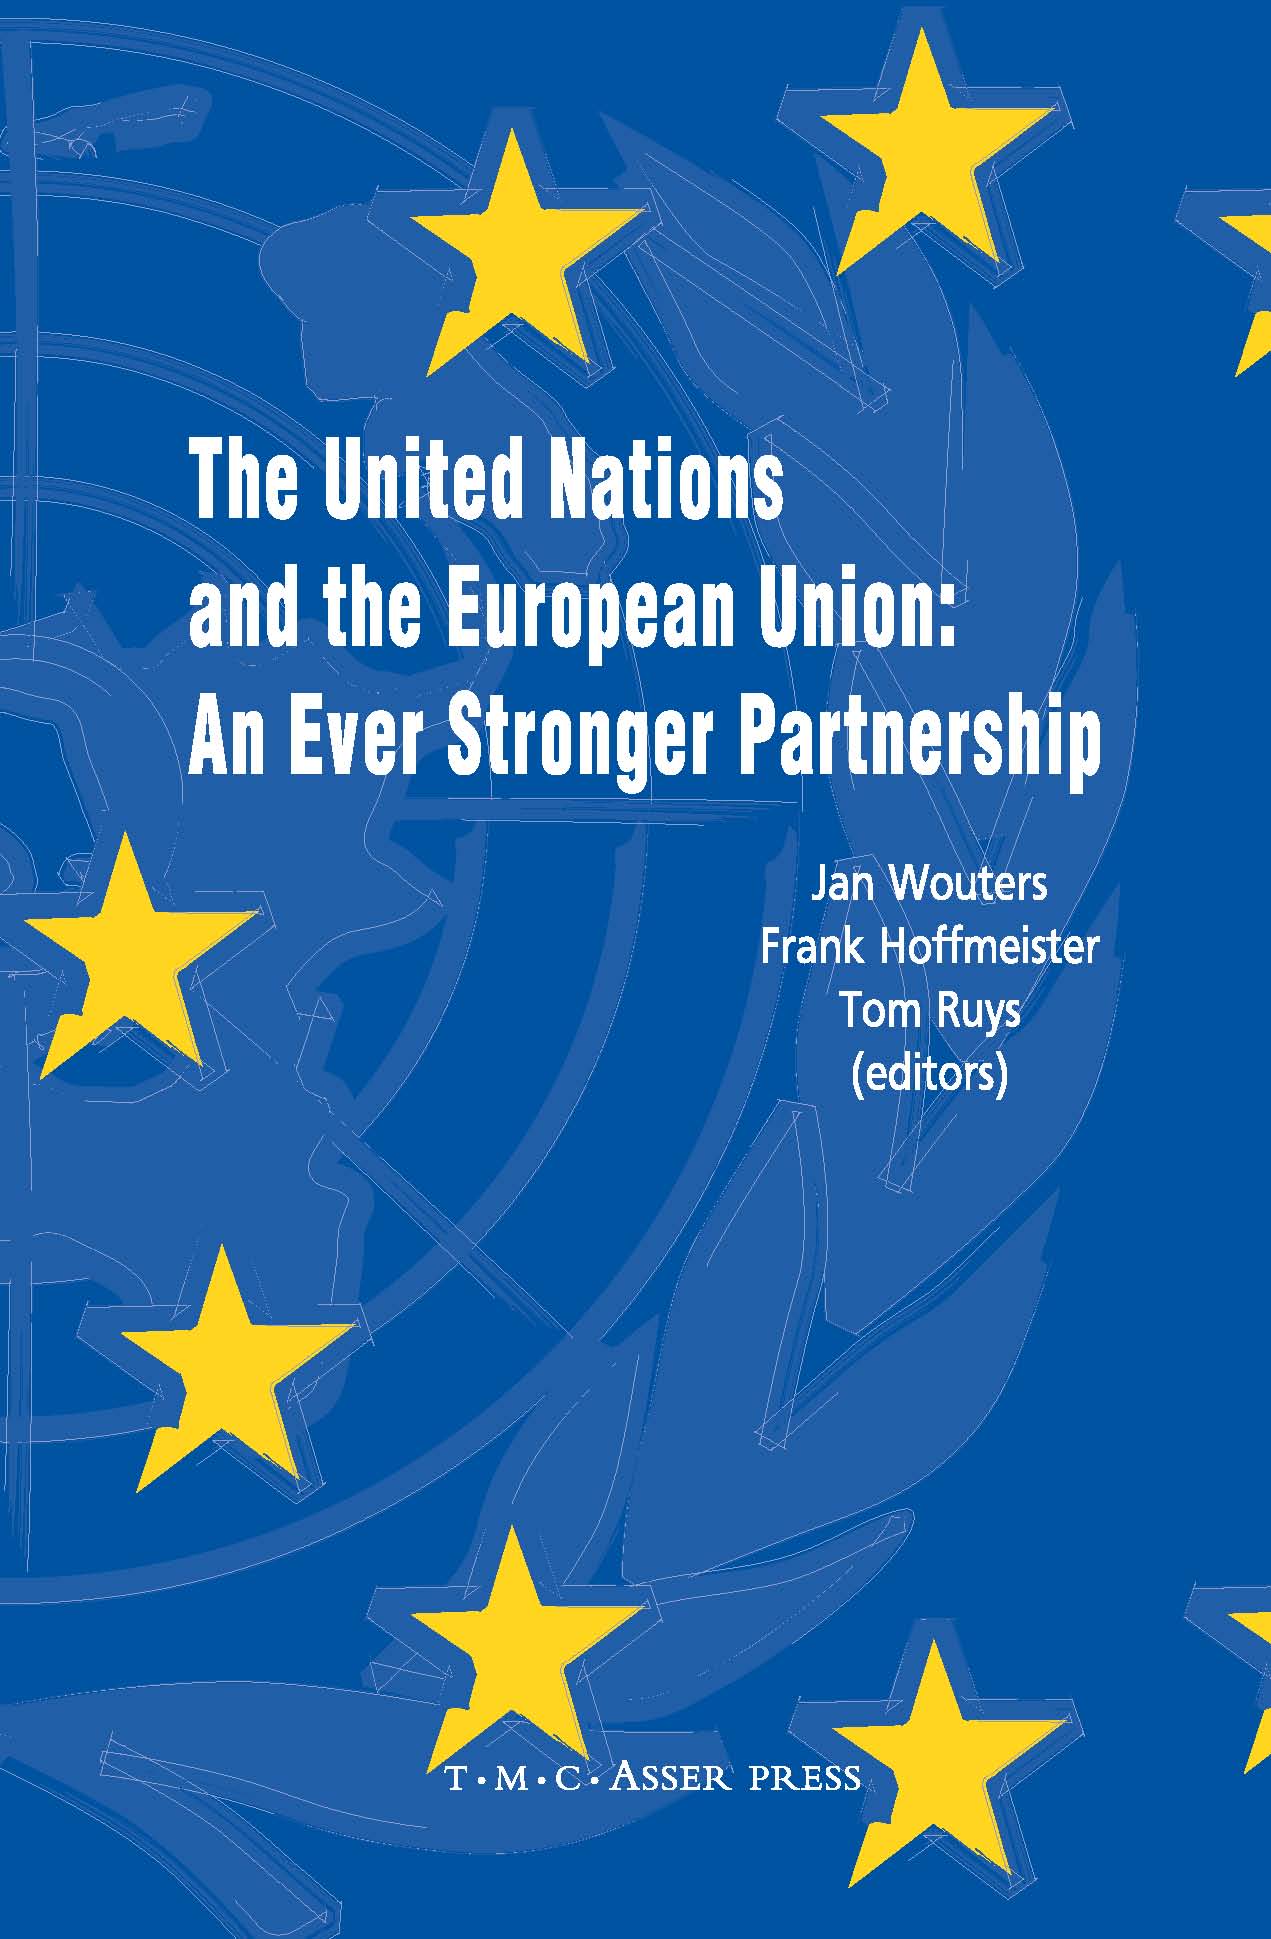 The United Nations and the European Union - An Ever Stronger Partnership